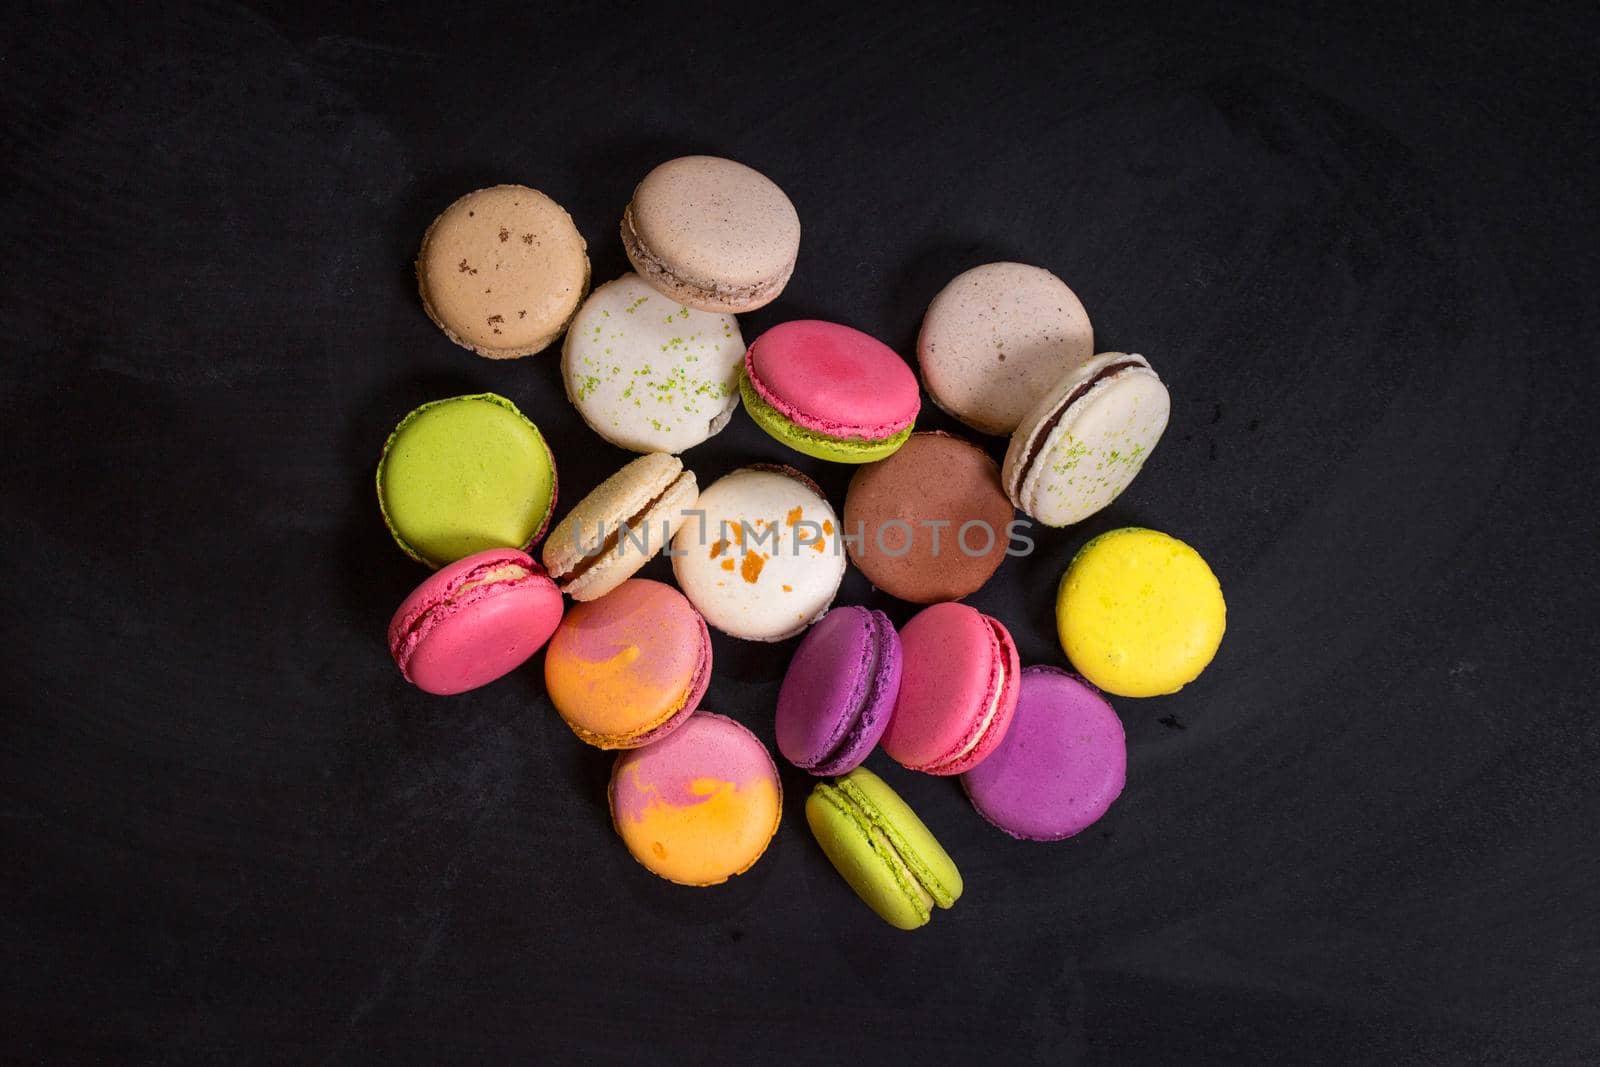 Assorted colorful macaroons on a dark background by its_al_dente